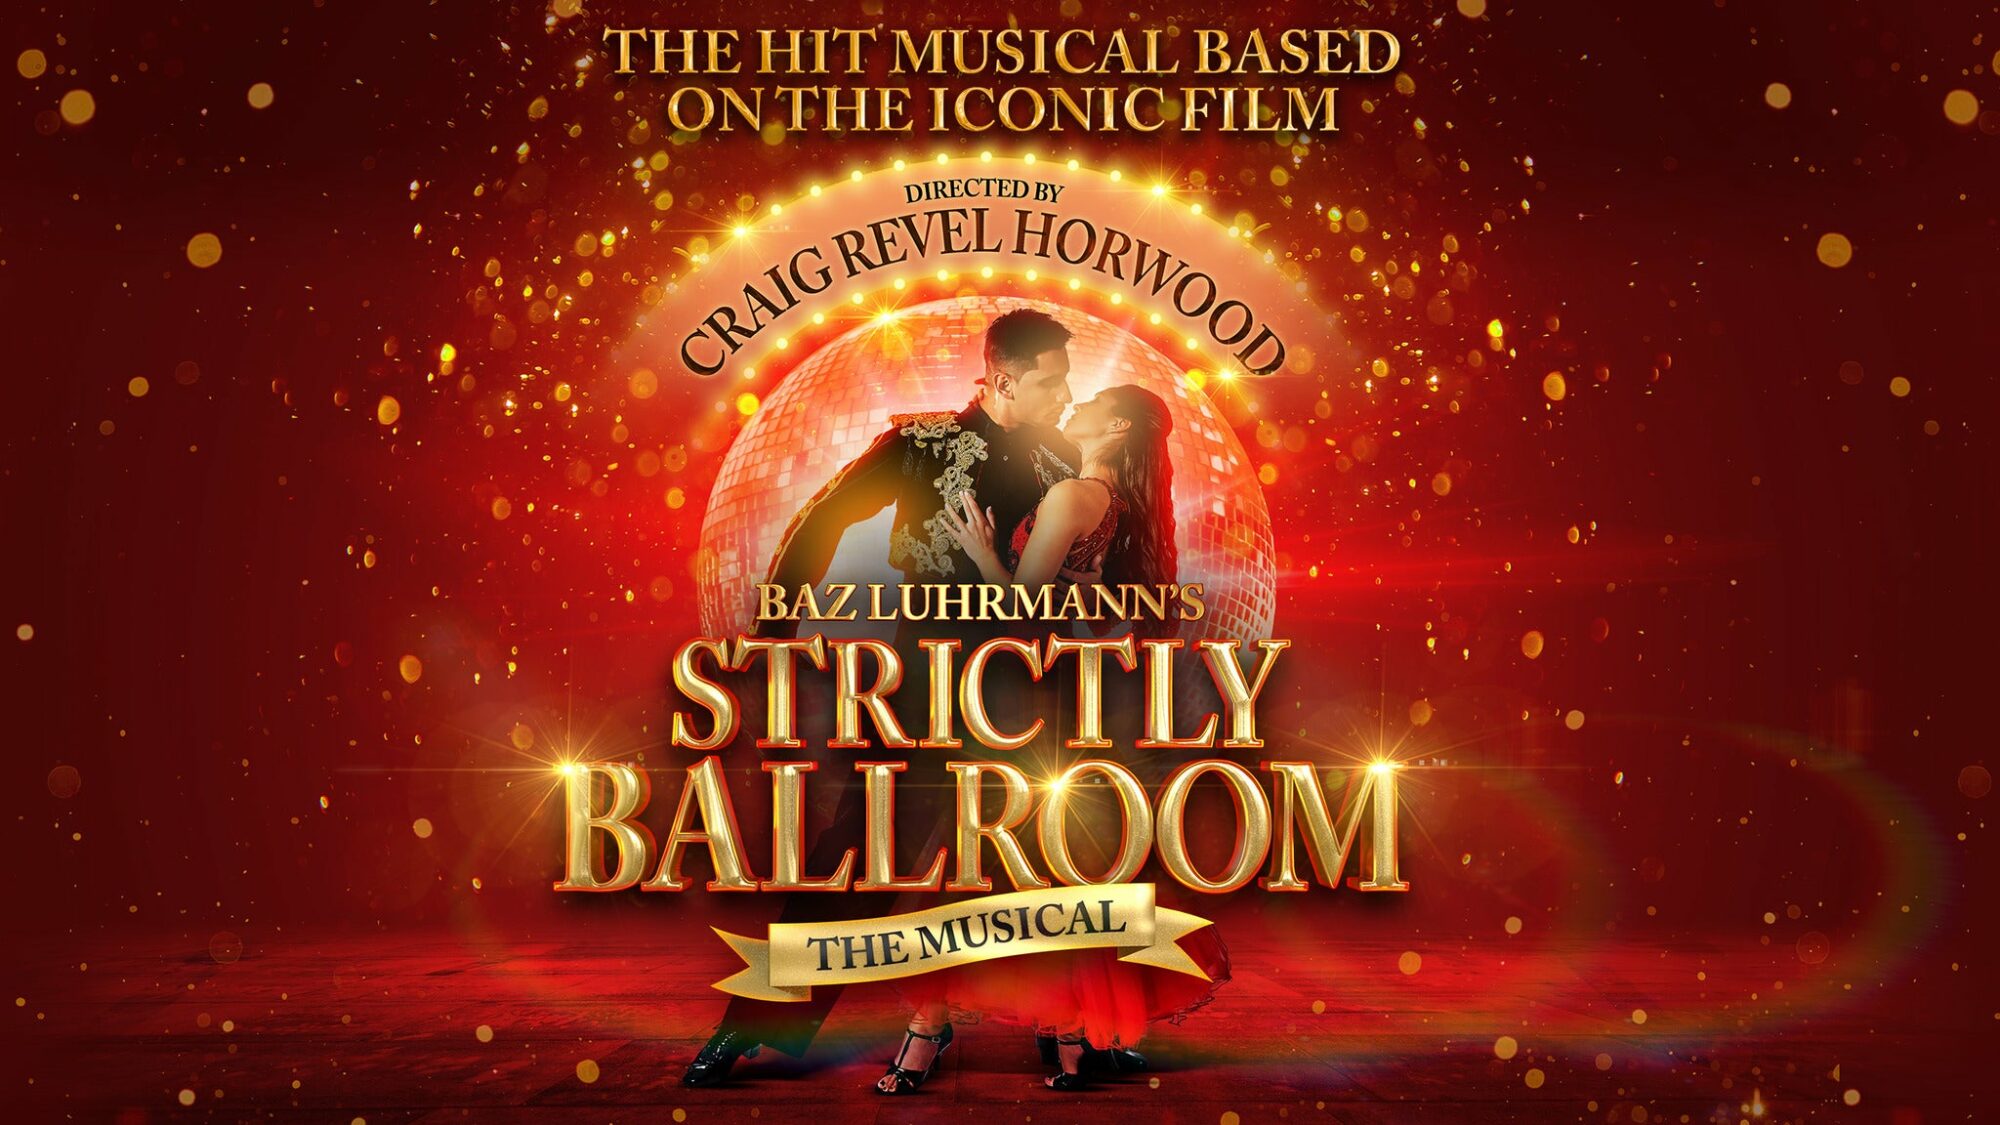 Image name Strictly Ballroom The Musical at Hull New Theatre Hull the 14 image from the post Events in Yorkshire.com.